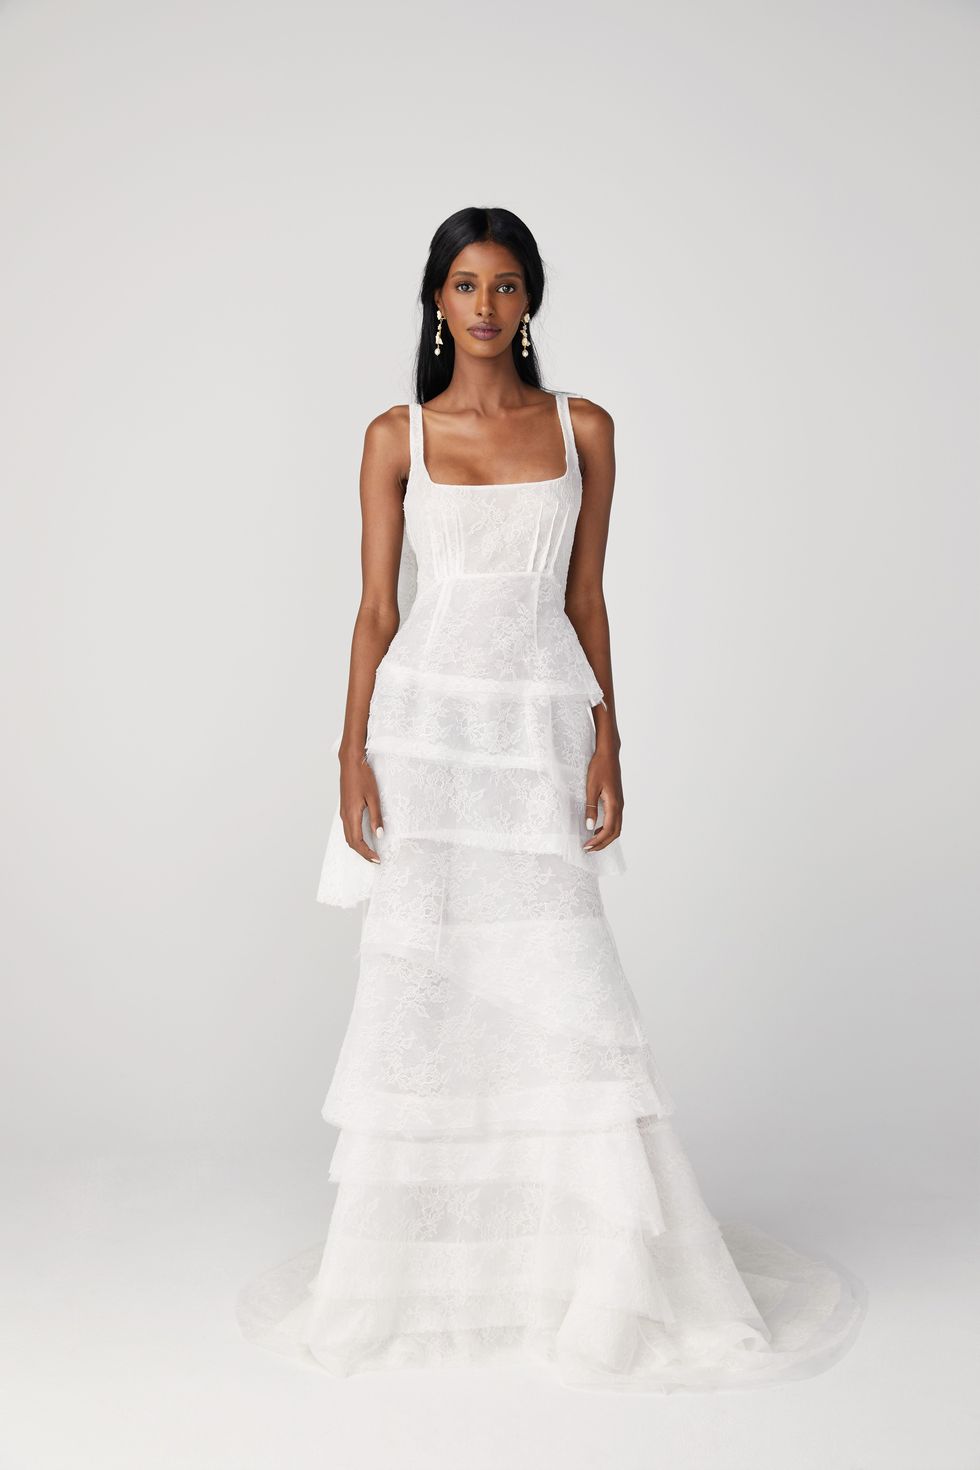 Brock Collection Created an Exclusive Bridal Capsule for Over the Moon